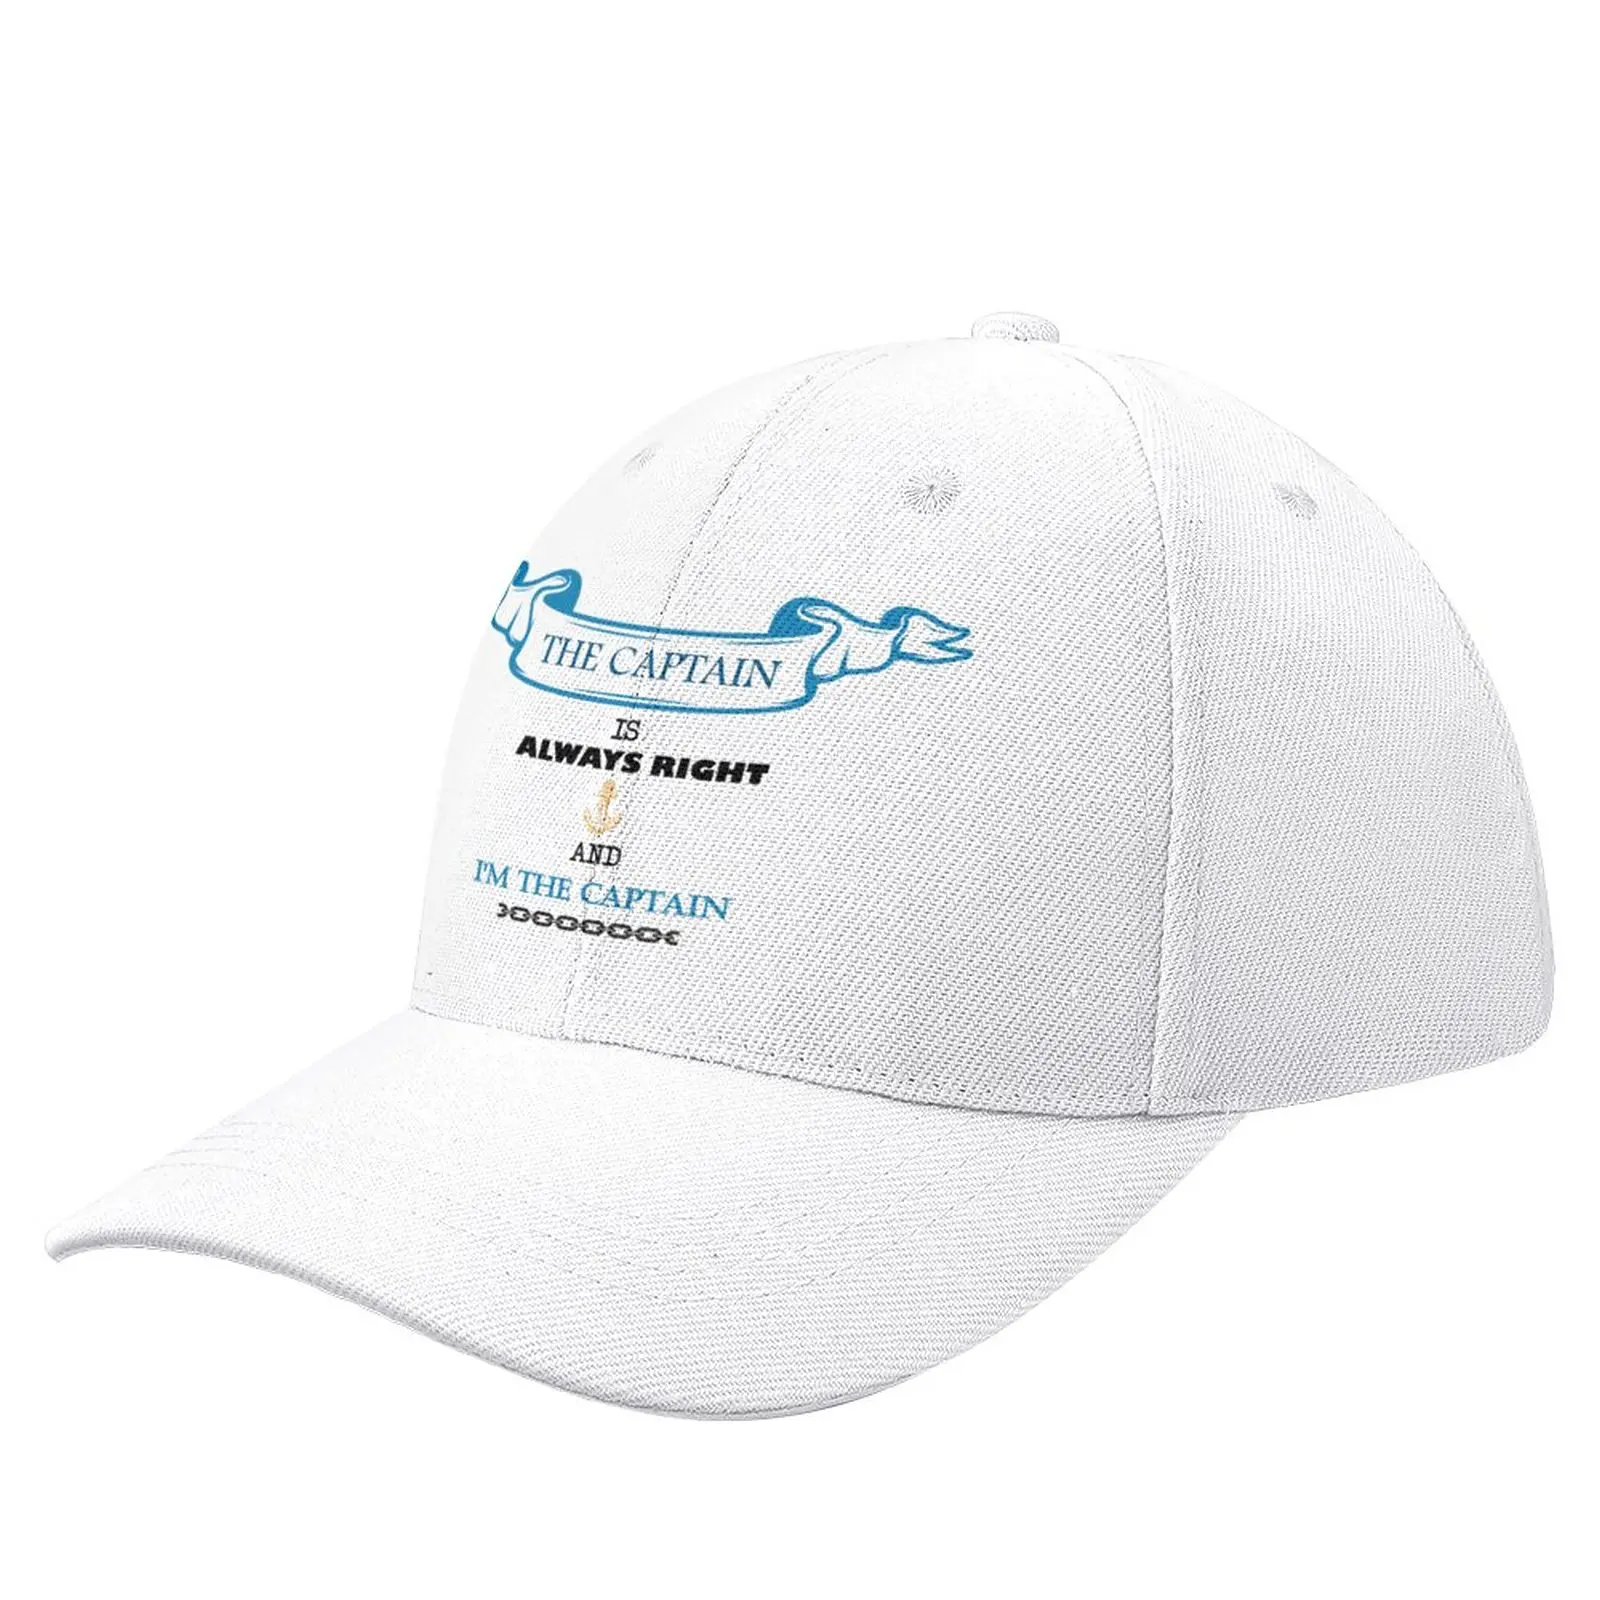 

The Captain is Always Right and I'm The Captain - Funny Boating Sailor Captain Lovers Baseball Cap |-F-| Icon Hat Men'S Women'S